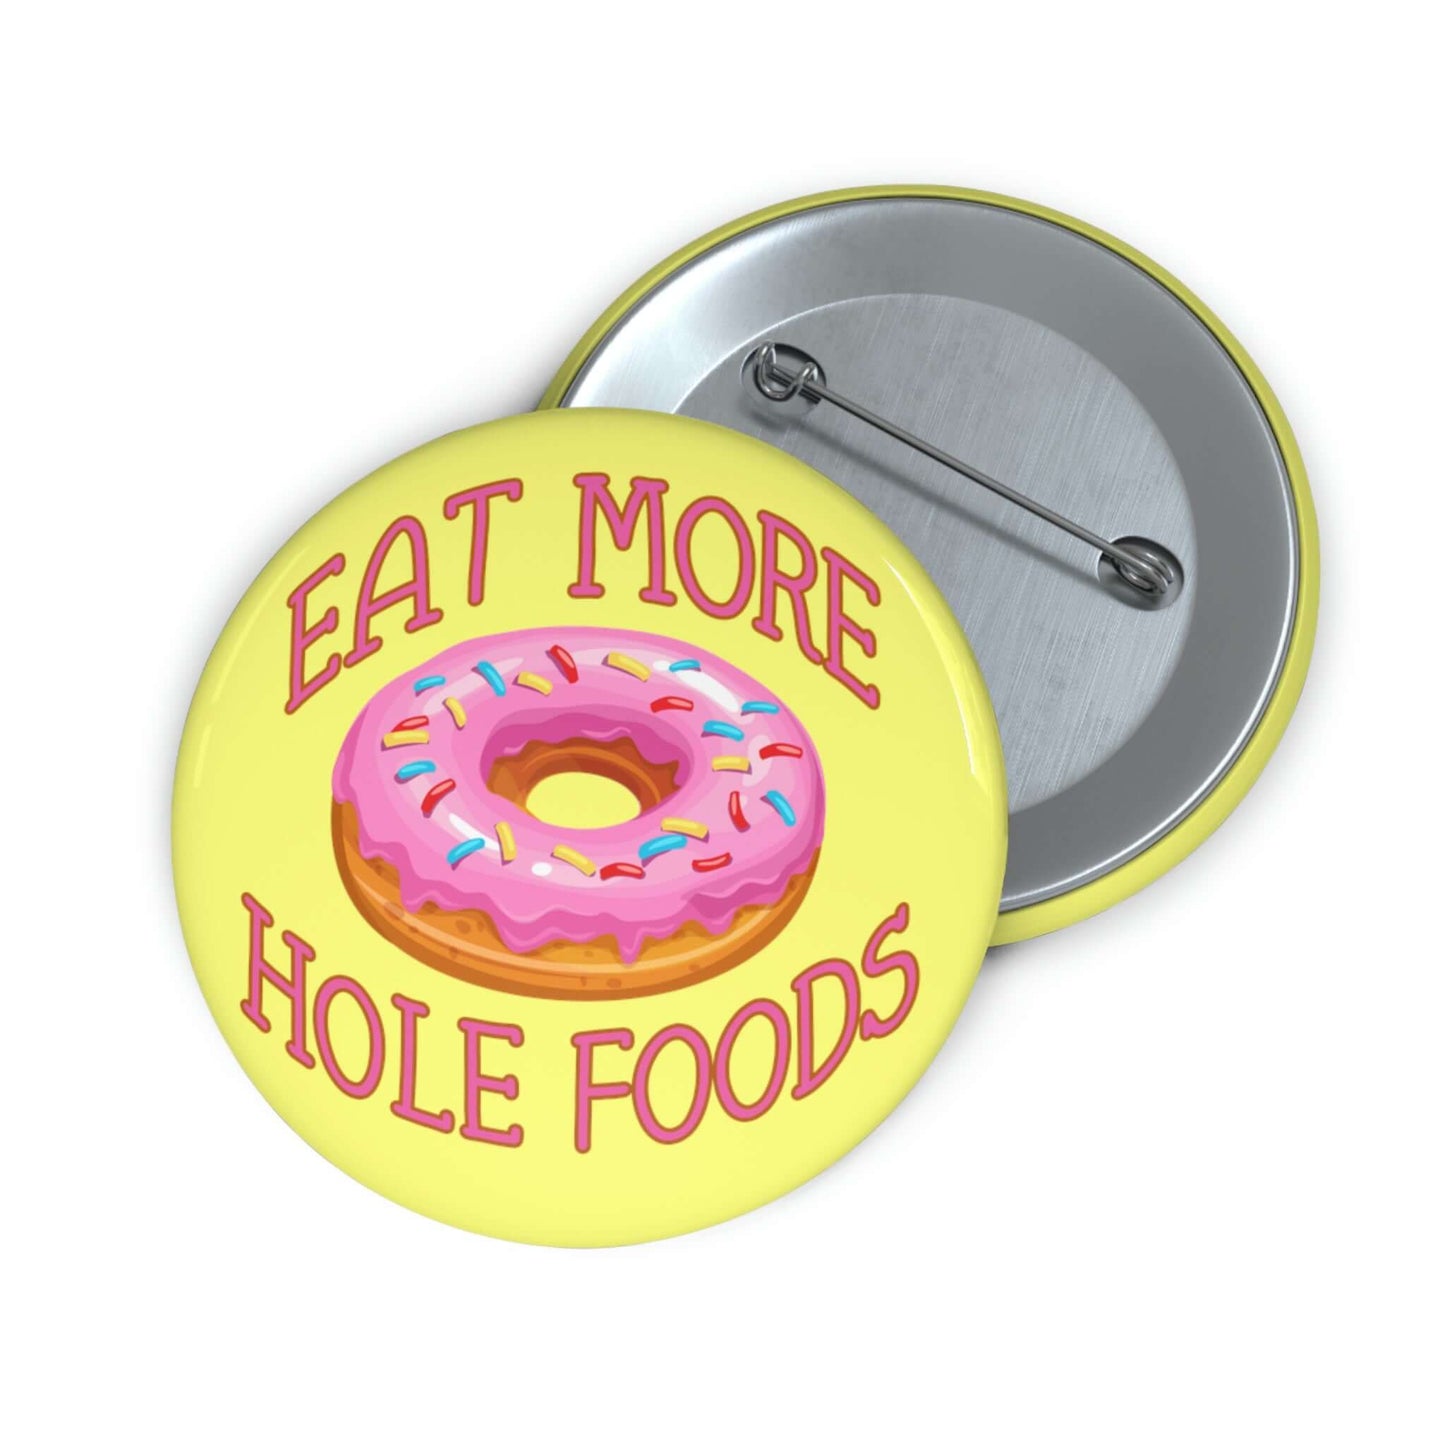 Donut pun pinback button. Eat more hole whole foods.